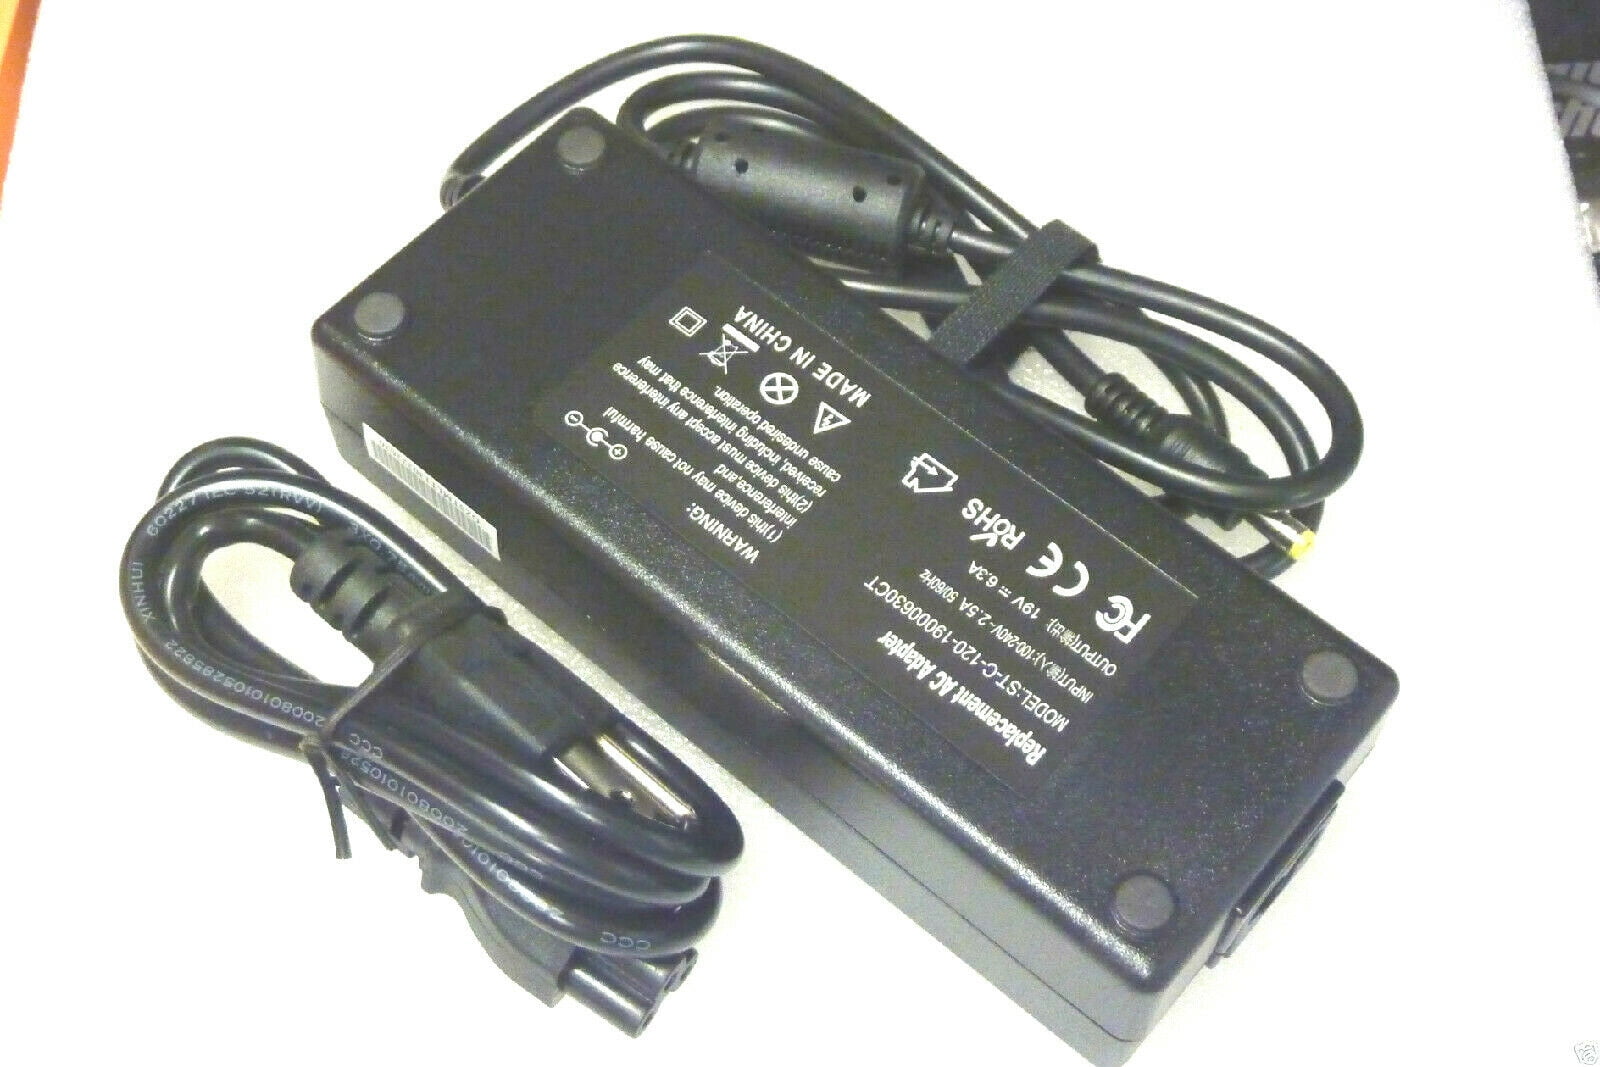 Details about AC Adapter For Intel NUC Kit Skull Canyon NUC6i7KYK Mini PC 120W Supply - Walmart.com